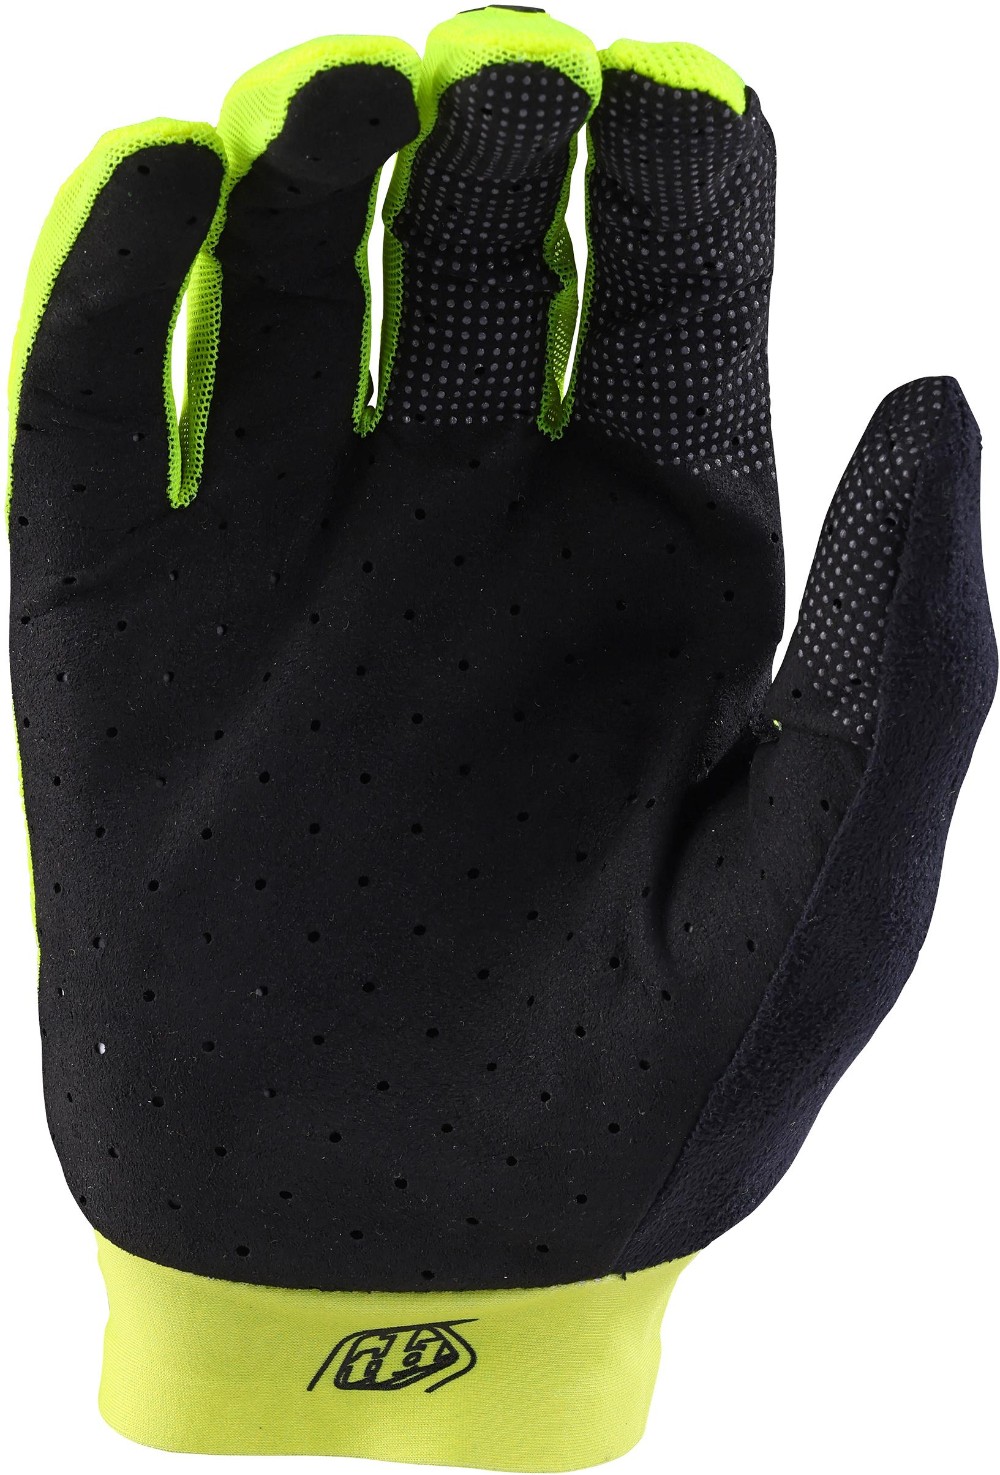 Ace Long Finger Cycling Gloves image 1